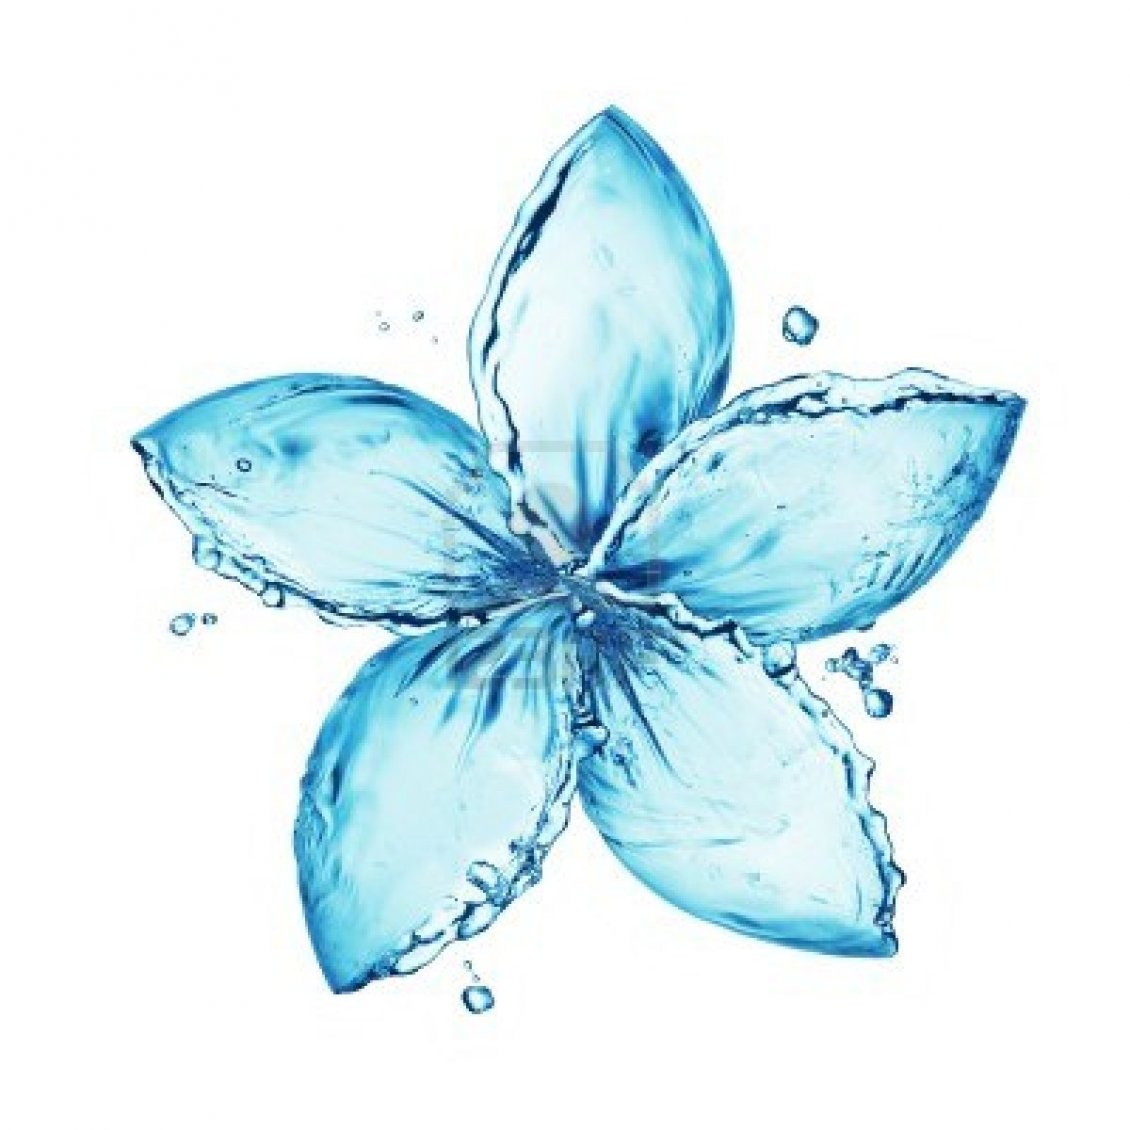 Download Wallpaper Awesome blue flower made of water